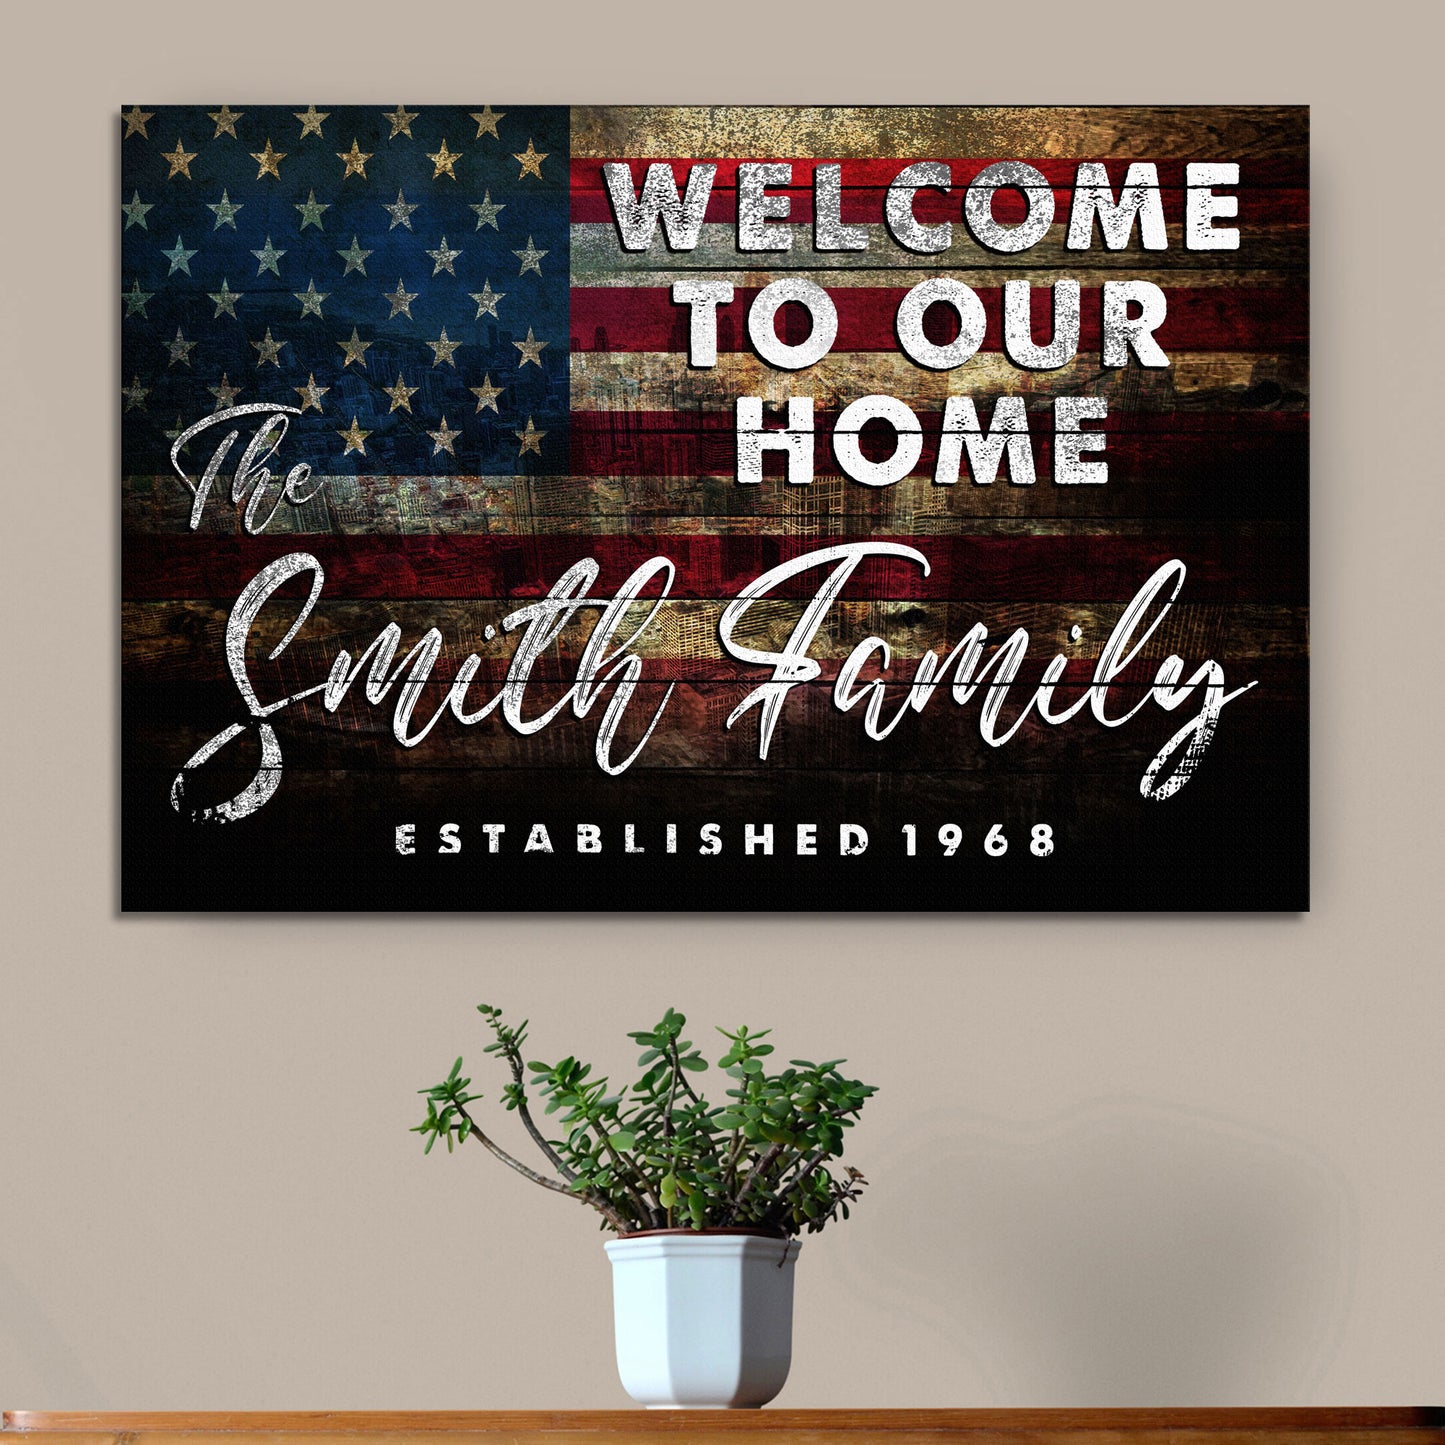 Welcome To Our Home Sign III - Image by Tailored Canvases